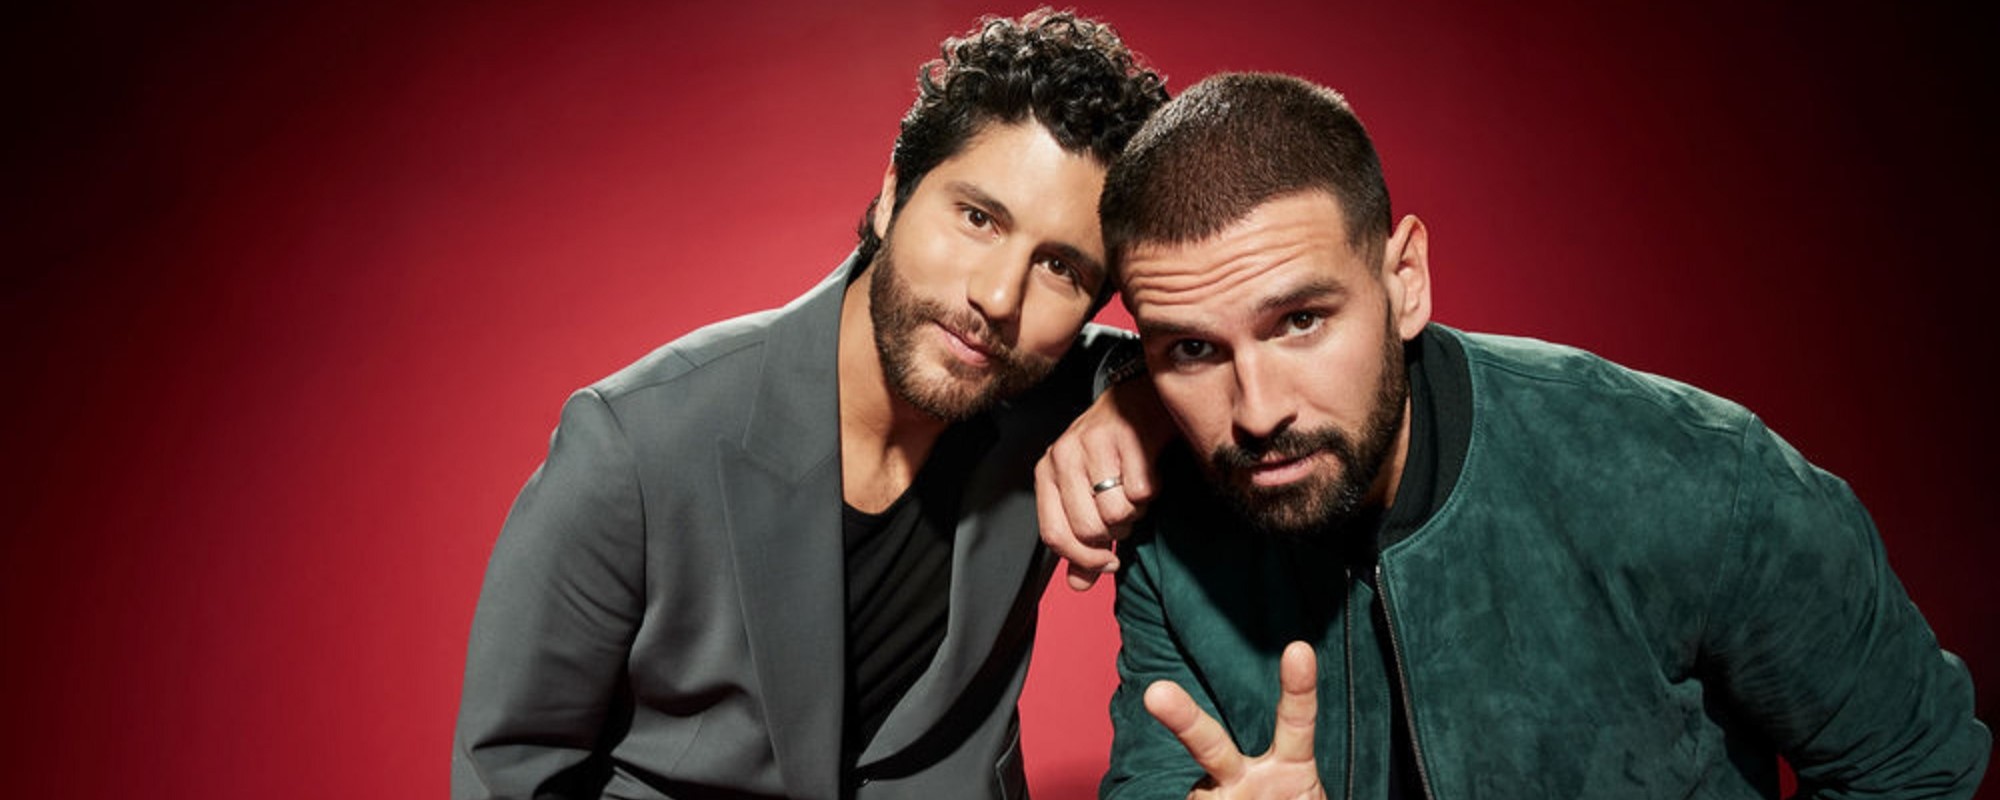 ‘The Voice’ Fans Are Buzzing as New Coaches Dan + Shay Tease Major Surprises for Season 25